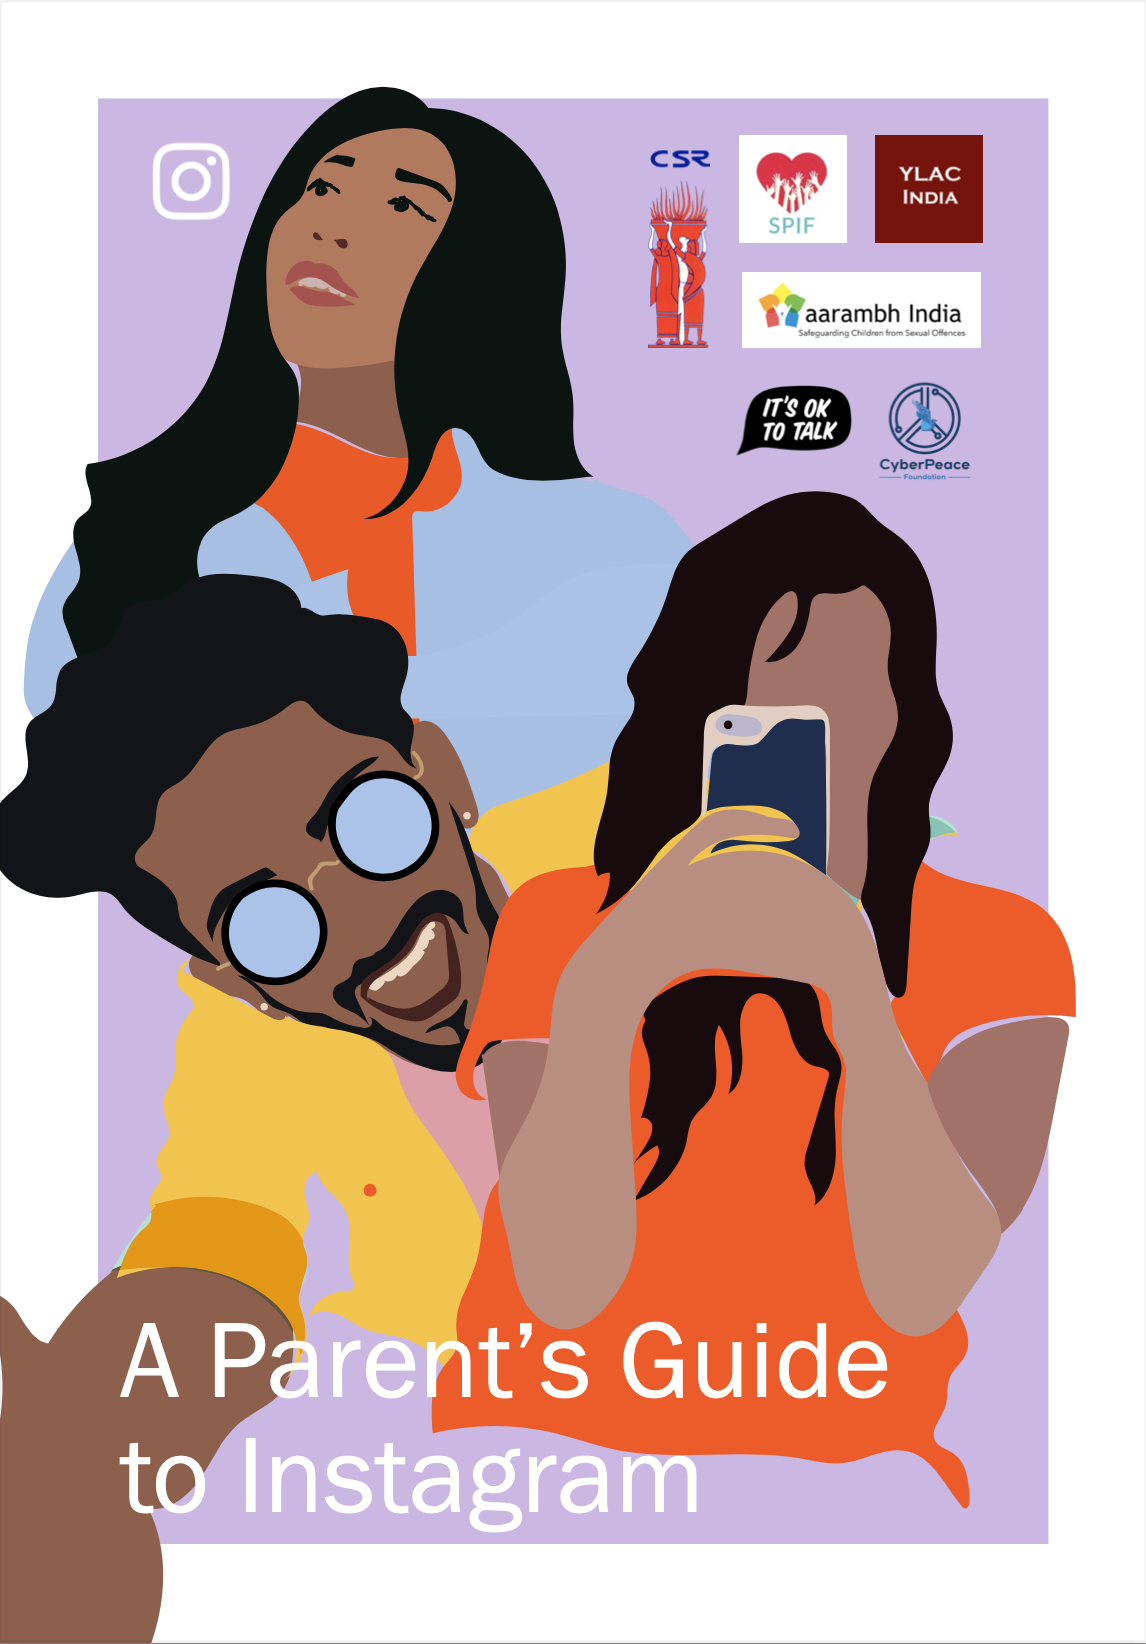 Instagram launches a Parents Guide in Malayalam to help young people be safe on the platform